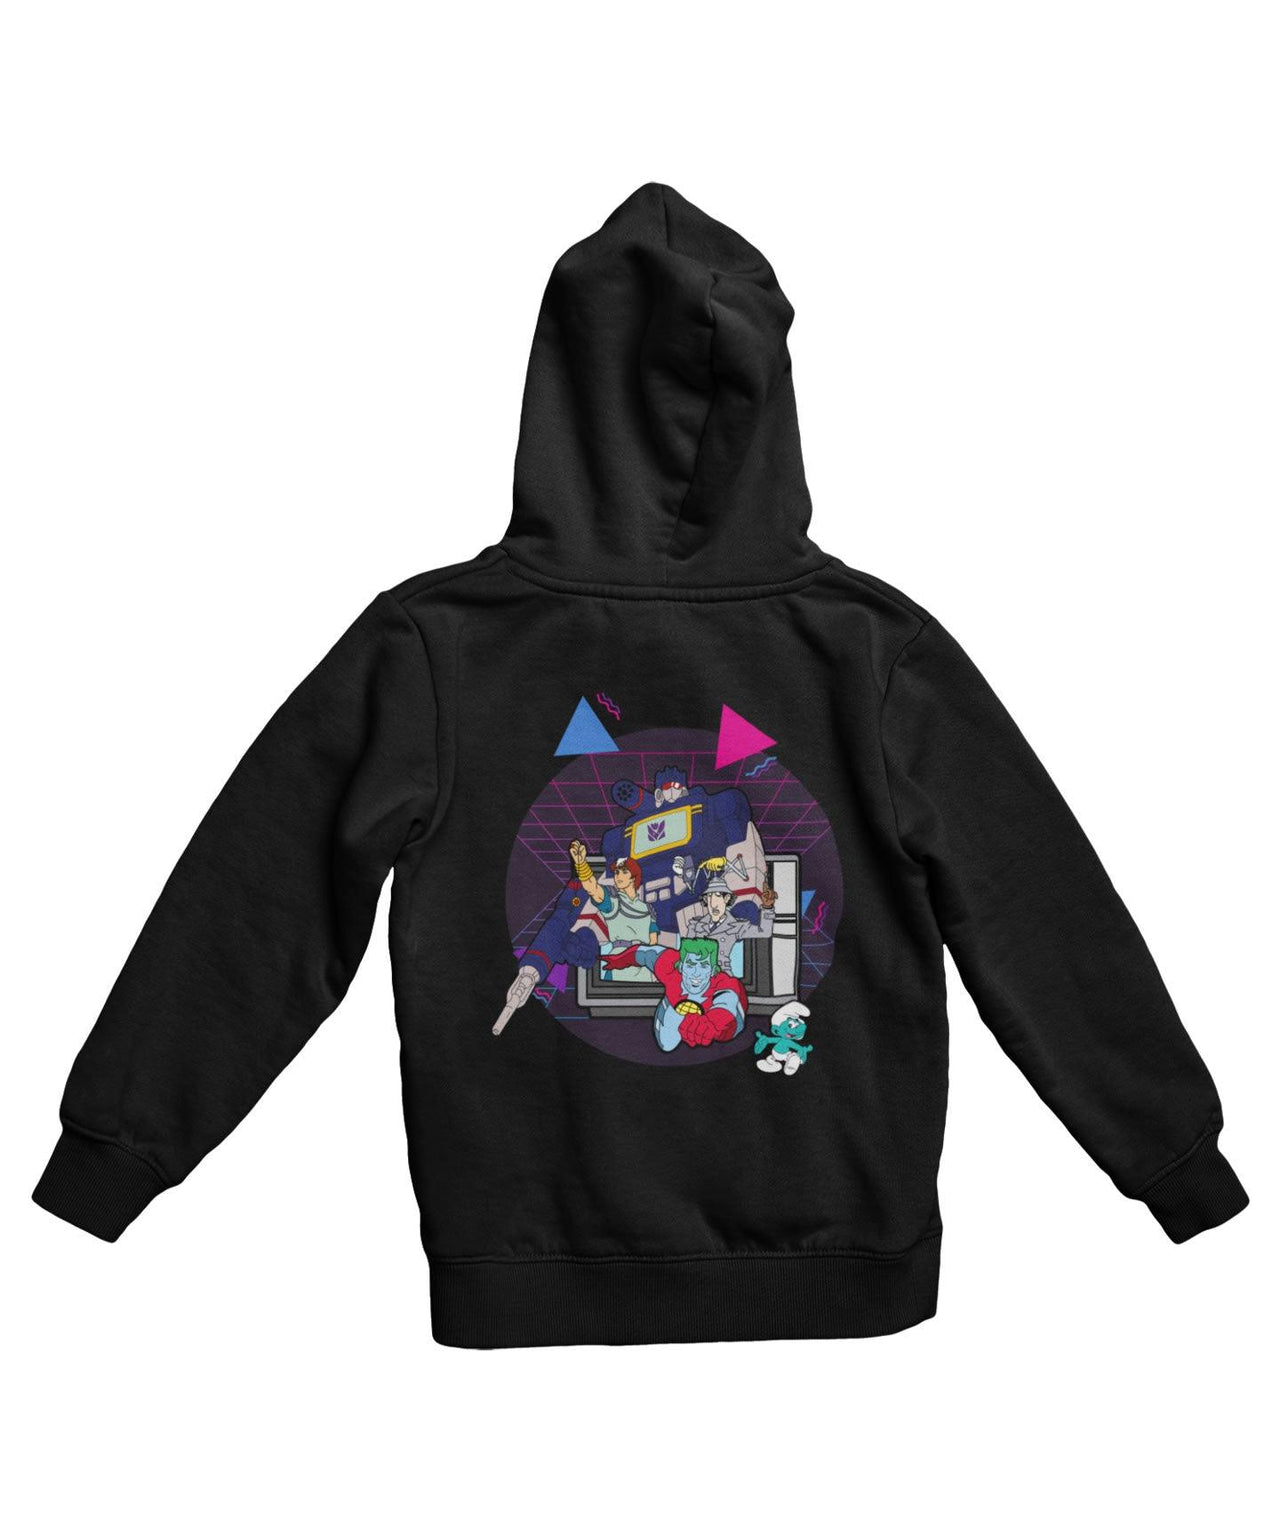 Top Notchy TV Toon Number 1 Back Printed Graphic Hoodie 8Ball